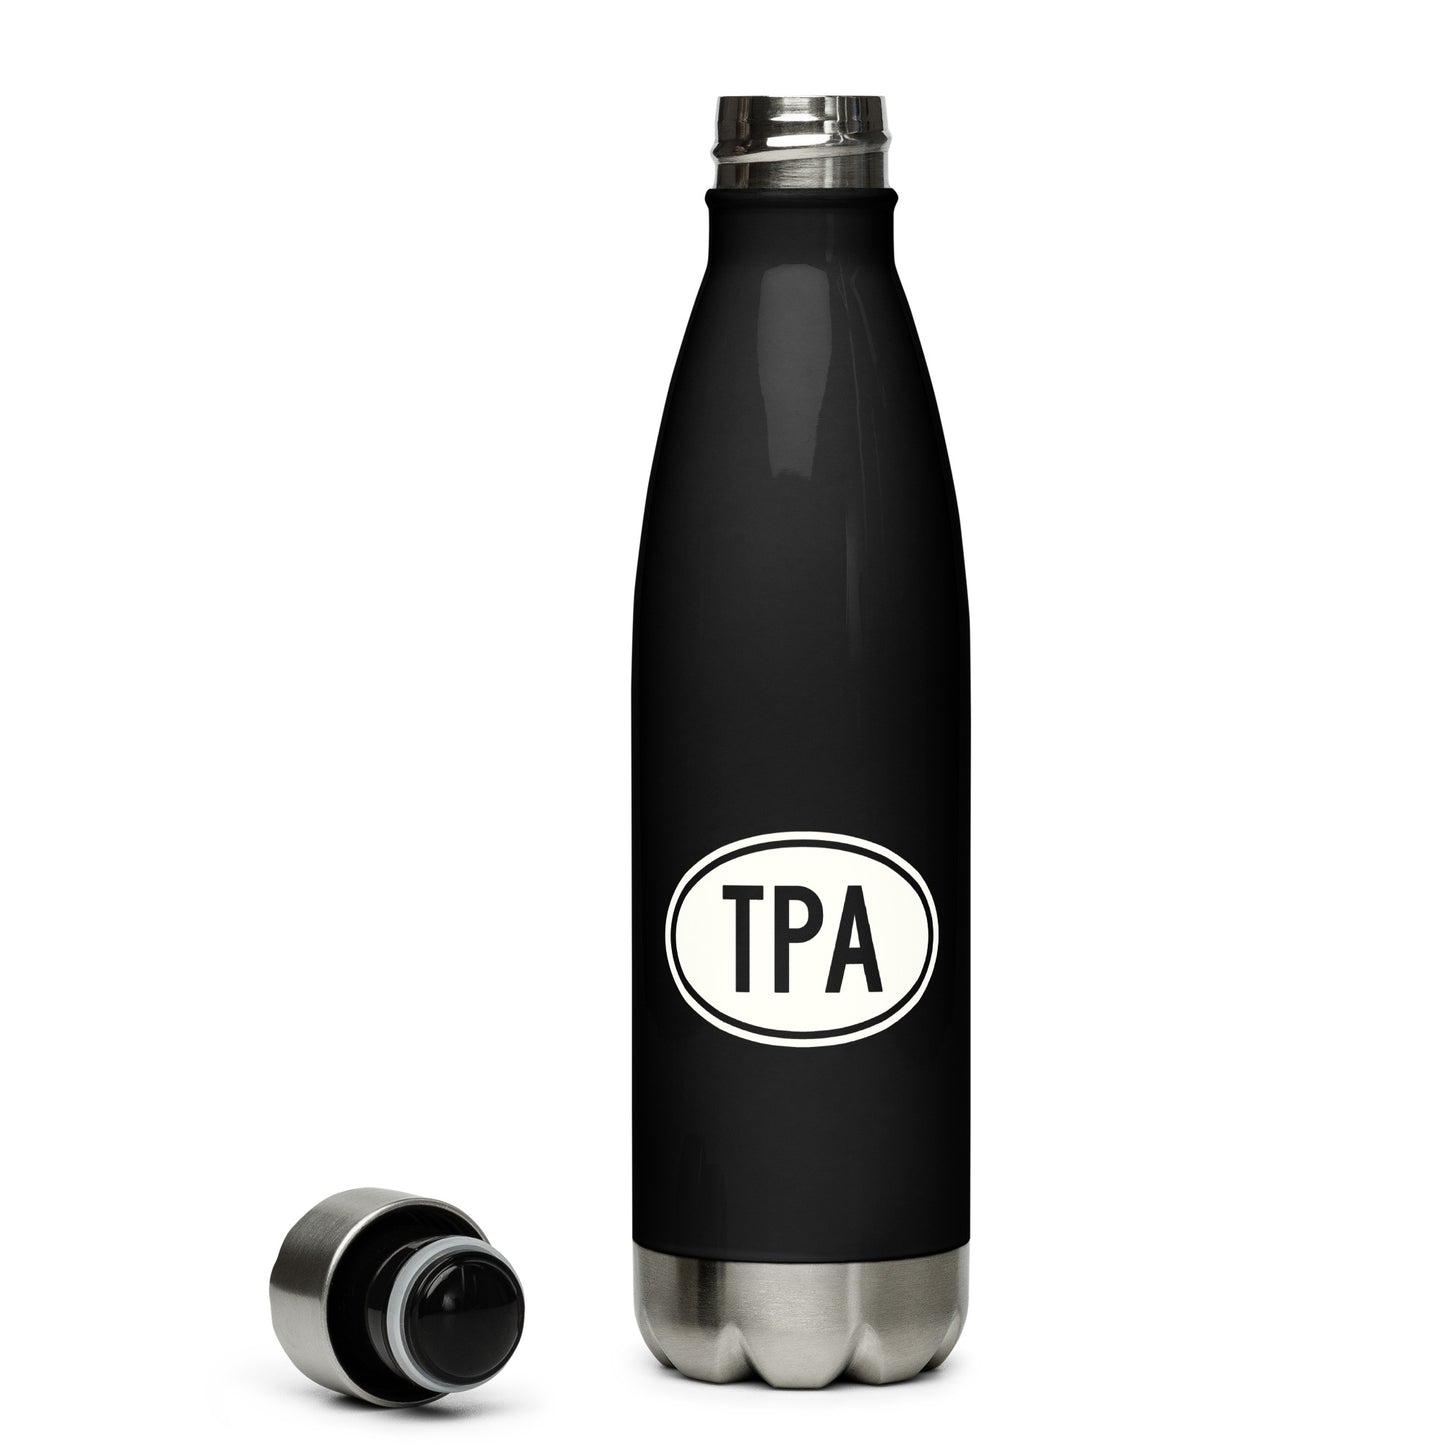 Unique Travel Gift Water Bottle - White Oval • TPA Tampa • YHM Designs - Image 04